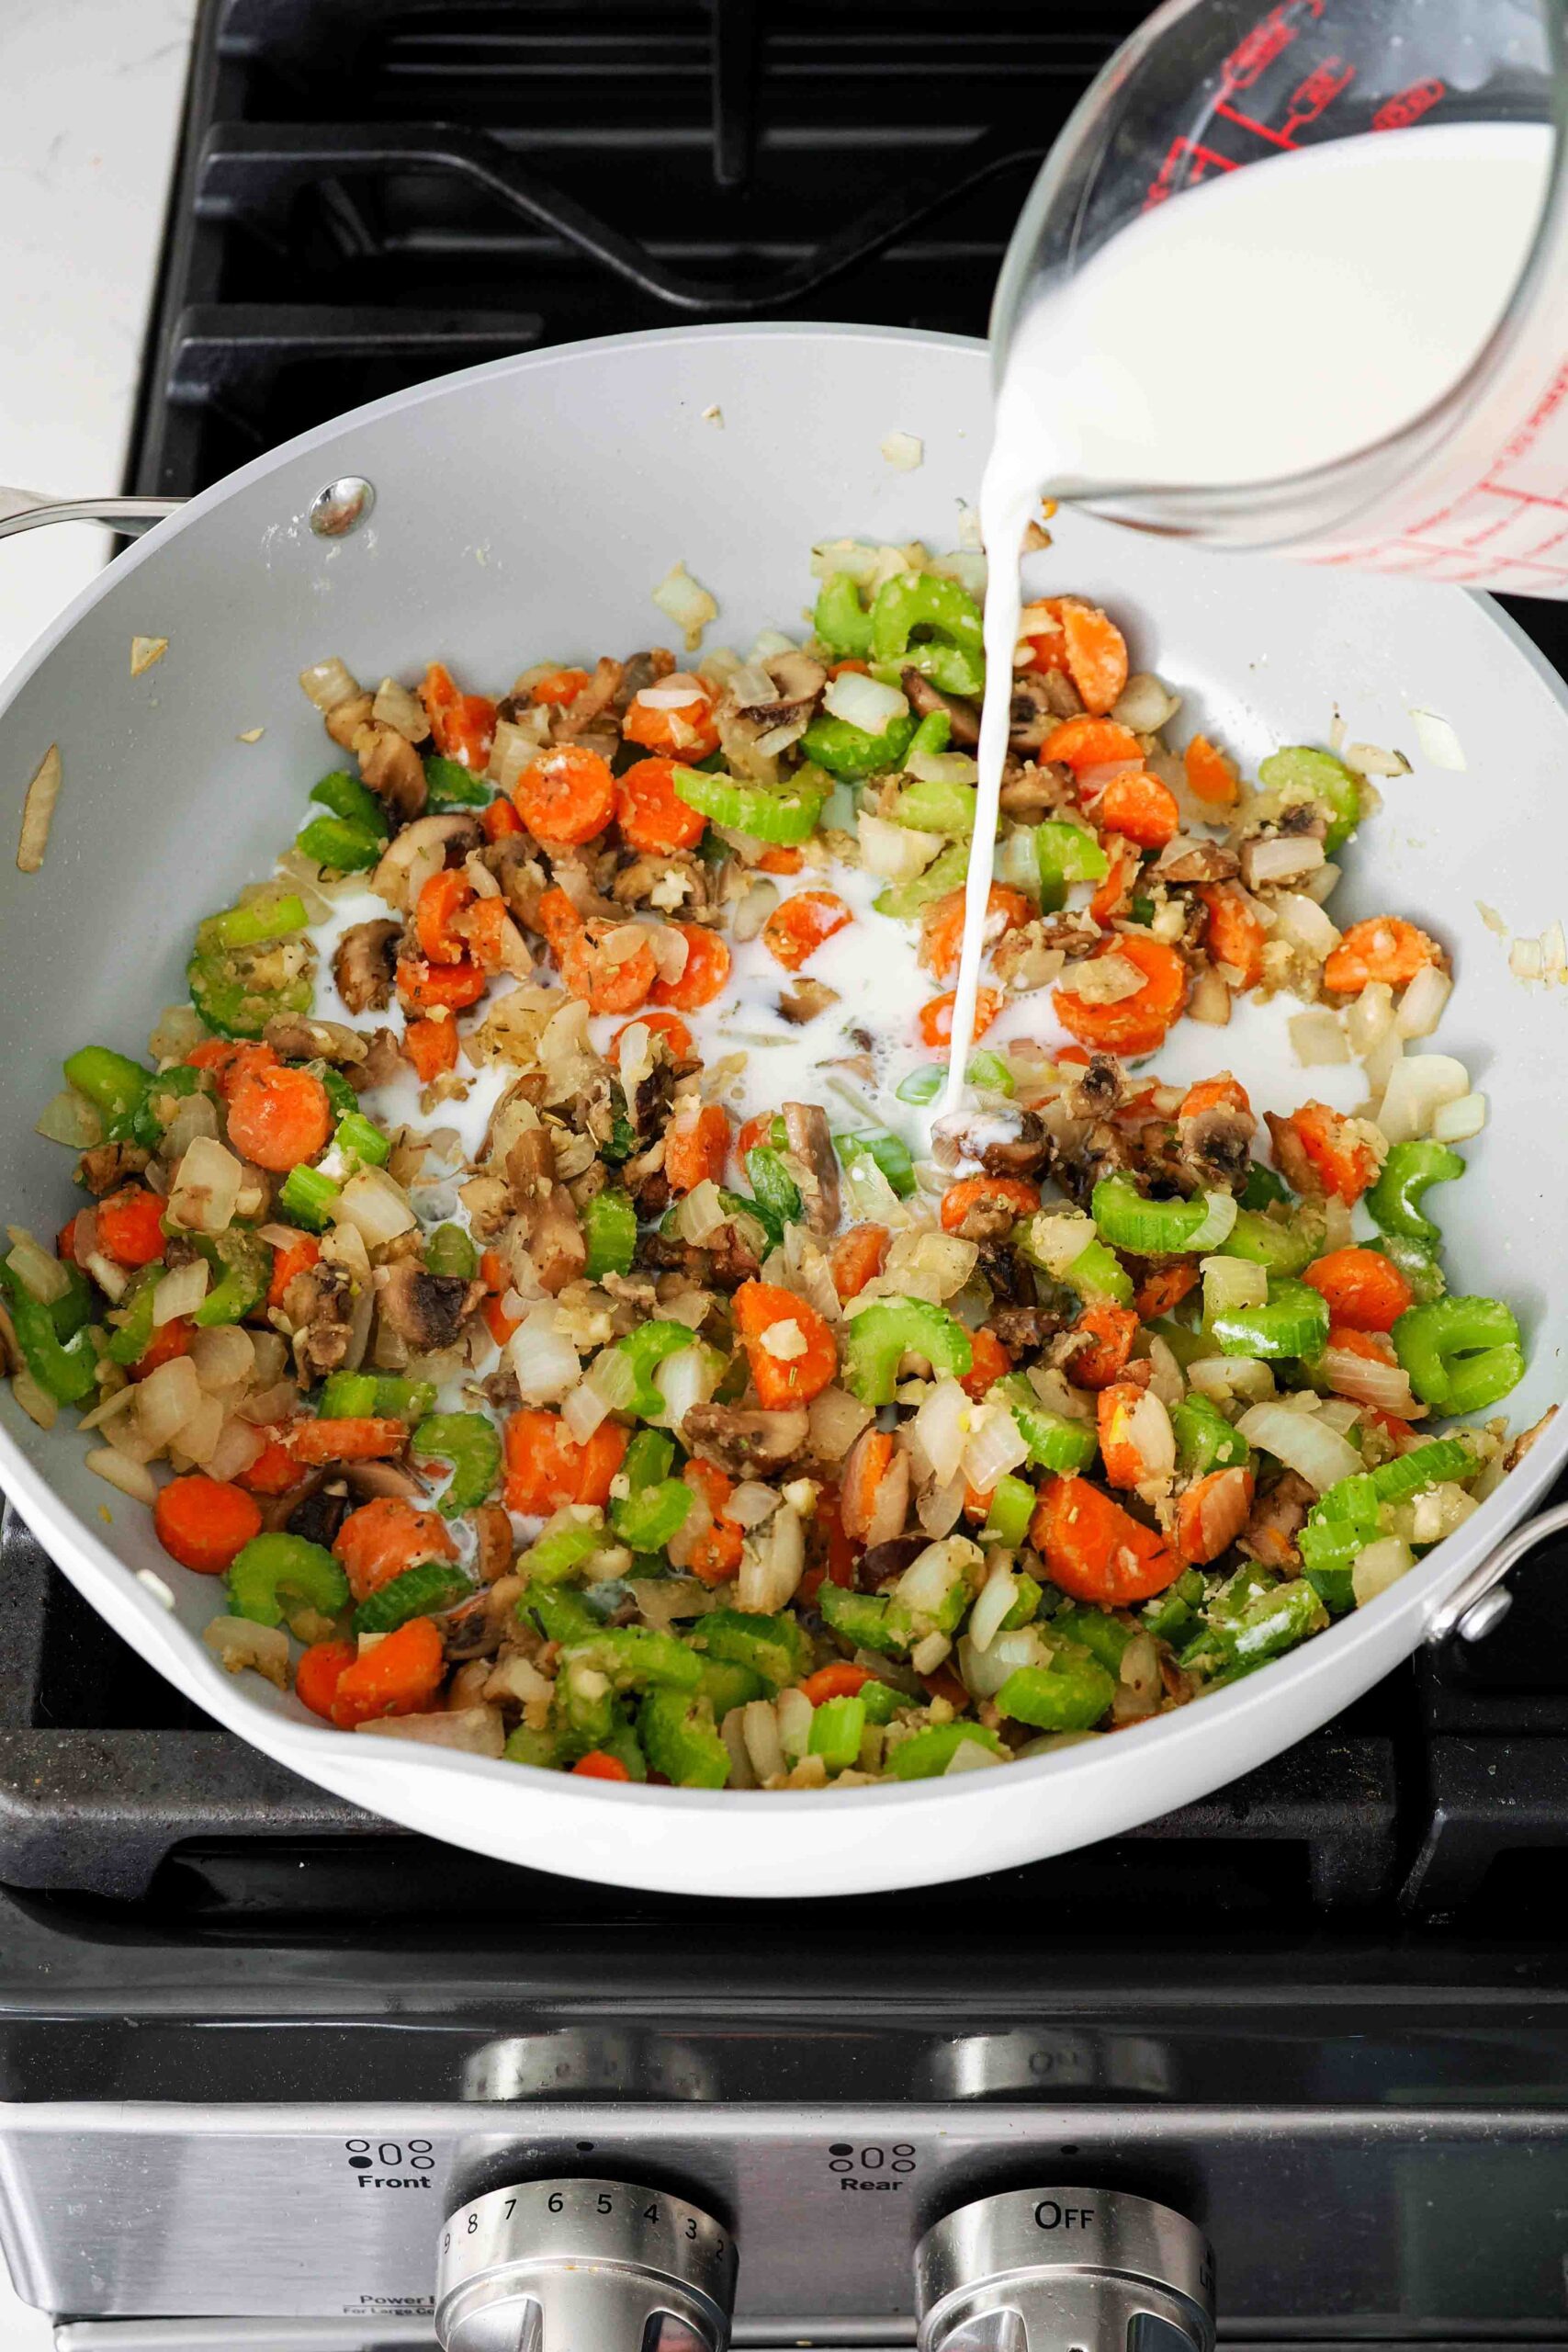 Milk is added to a pan full of sautéed vegetables with flour to create a sauce.